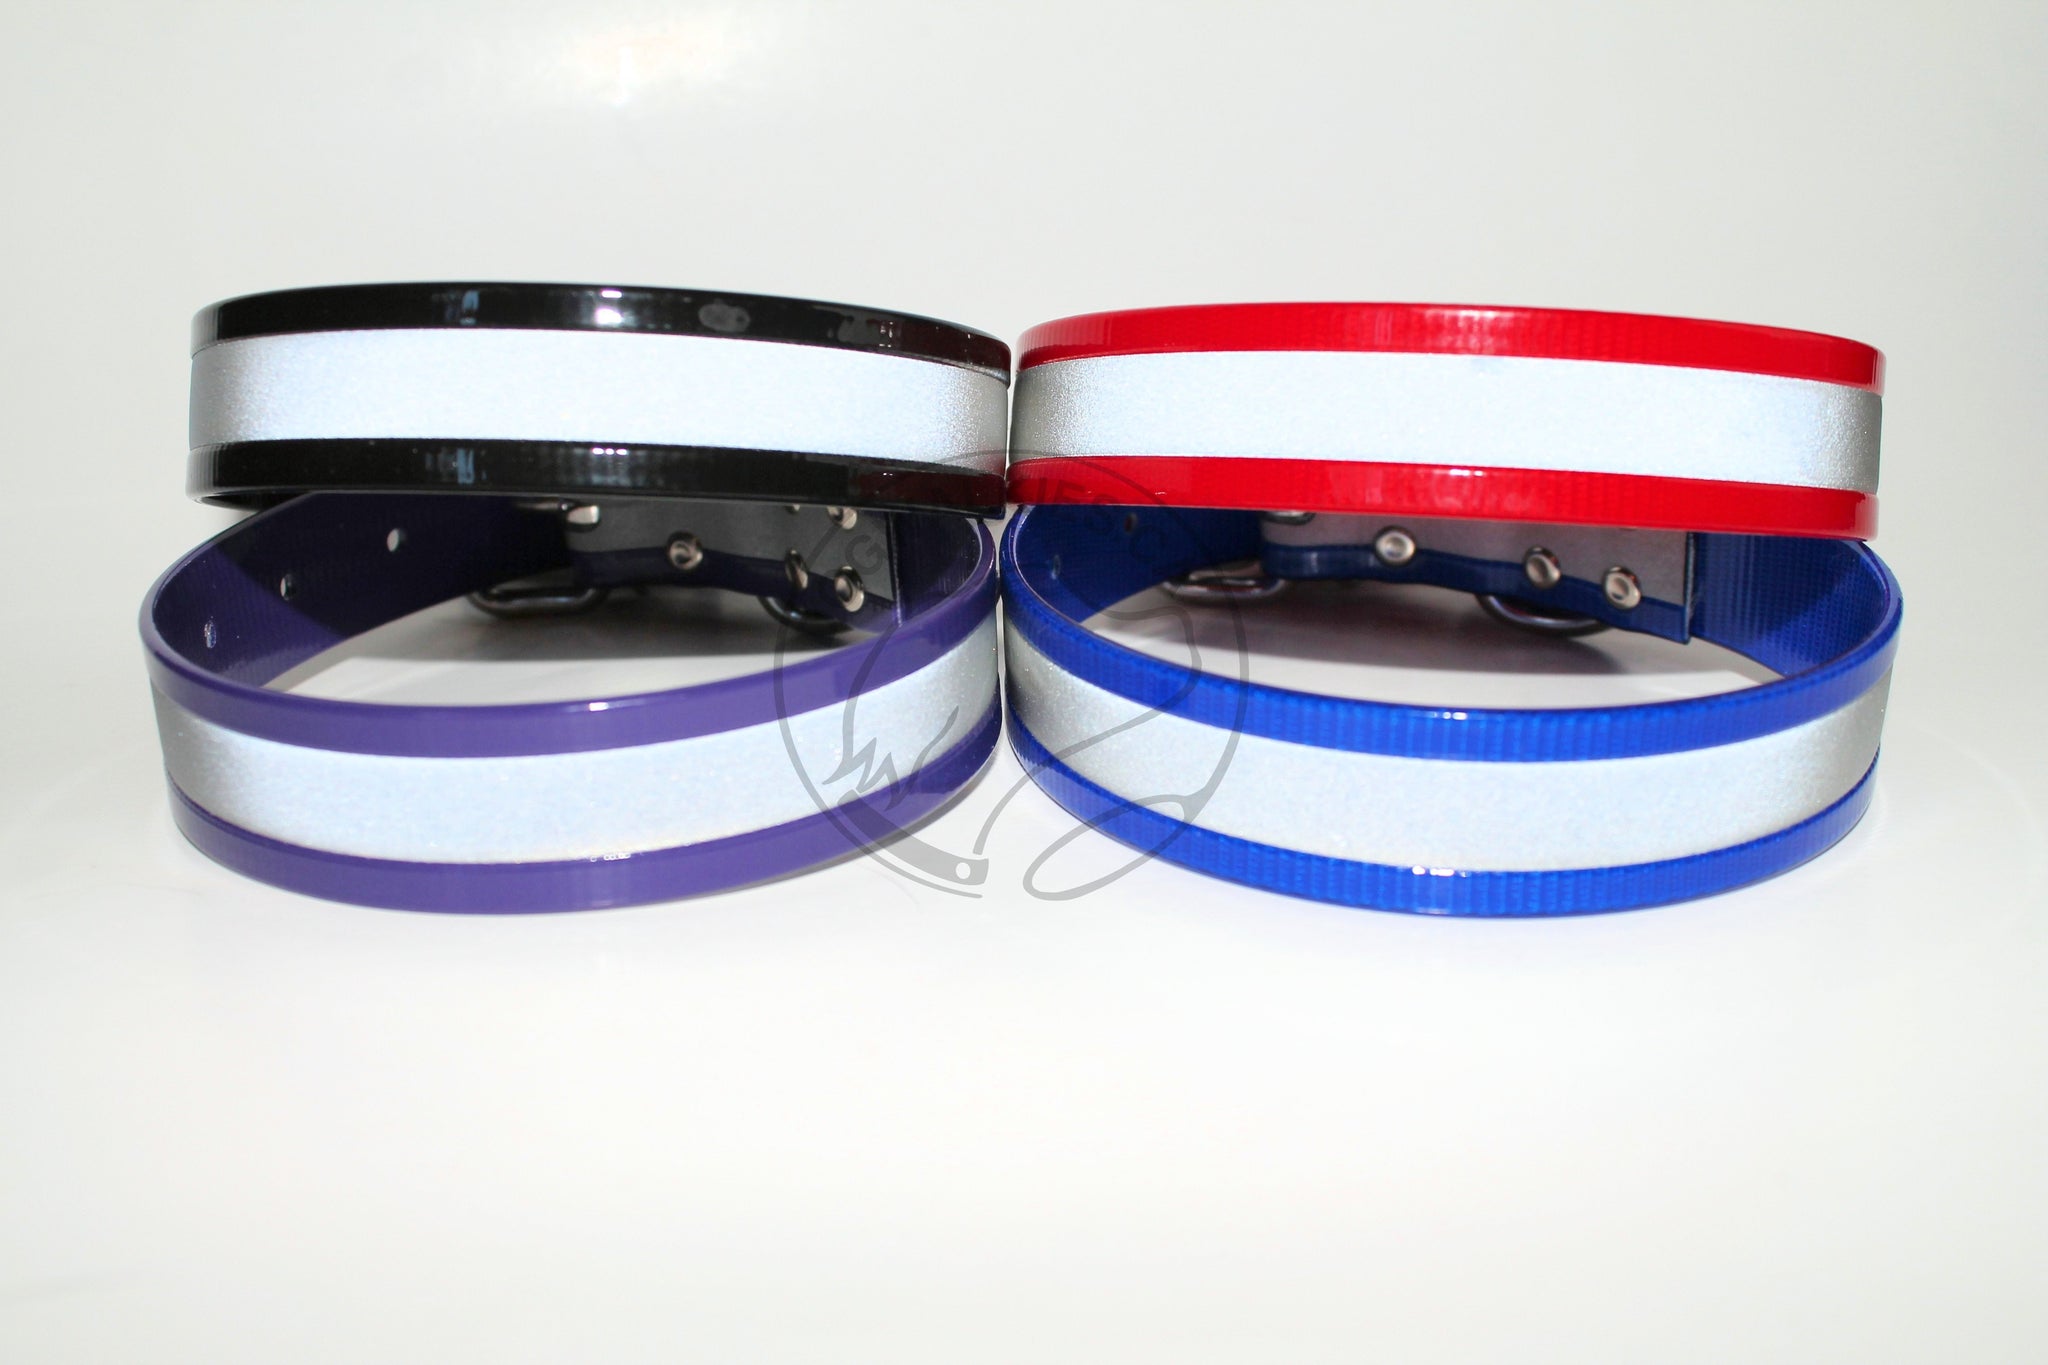 Reflective Genuine Biothane Dog Collar - 1 inch (25mm) wide - all colours